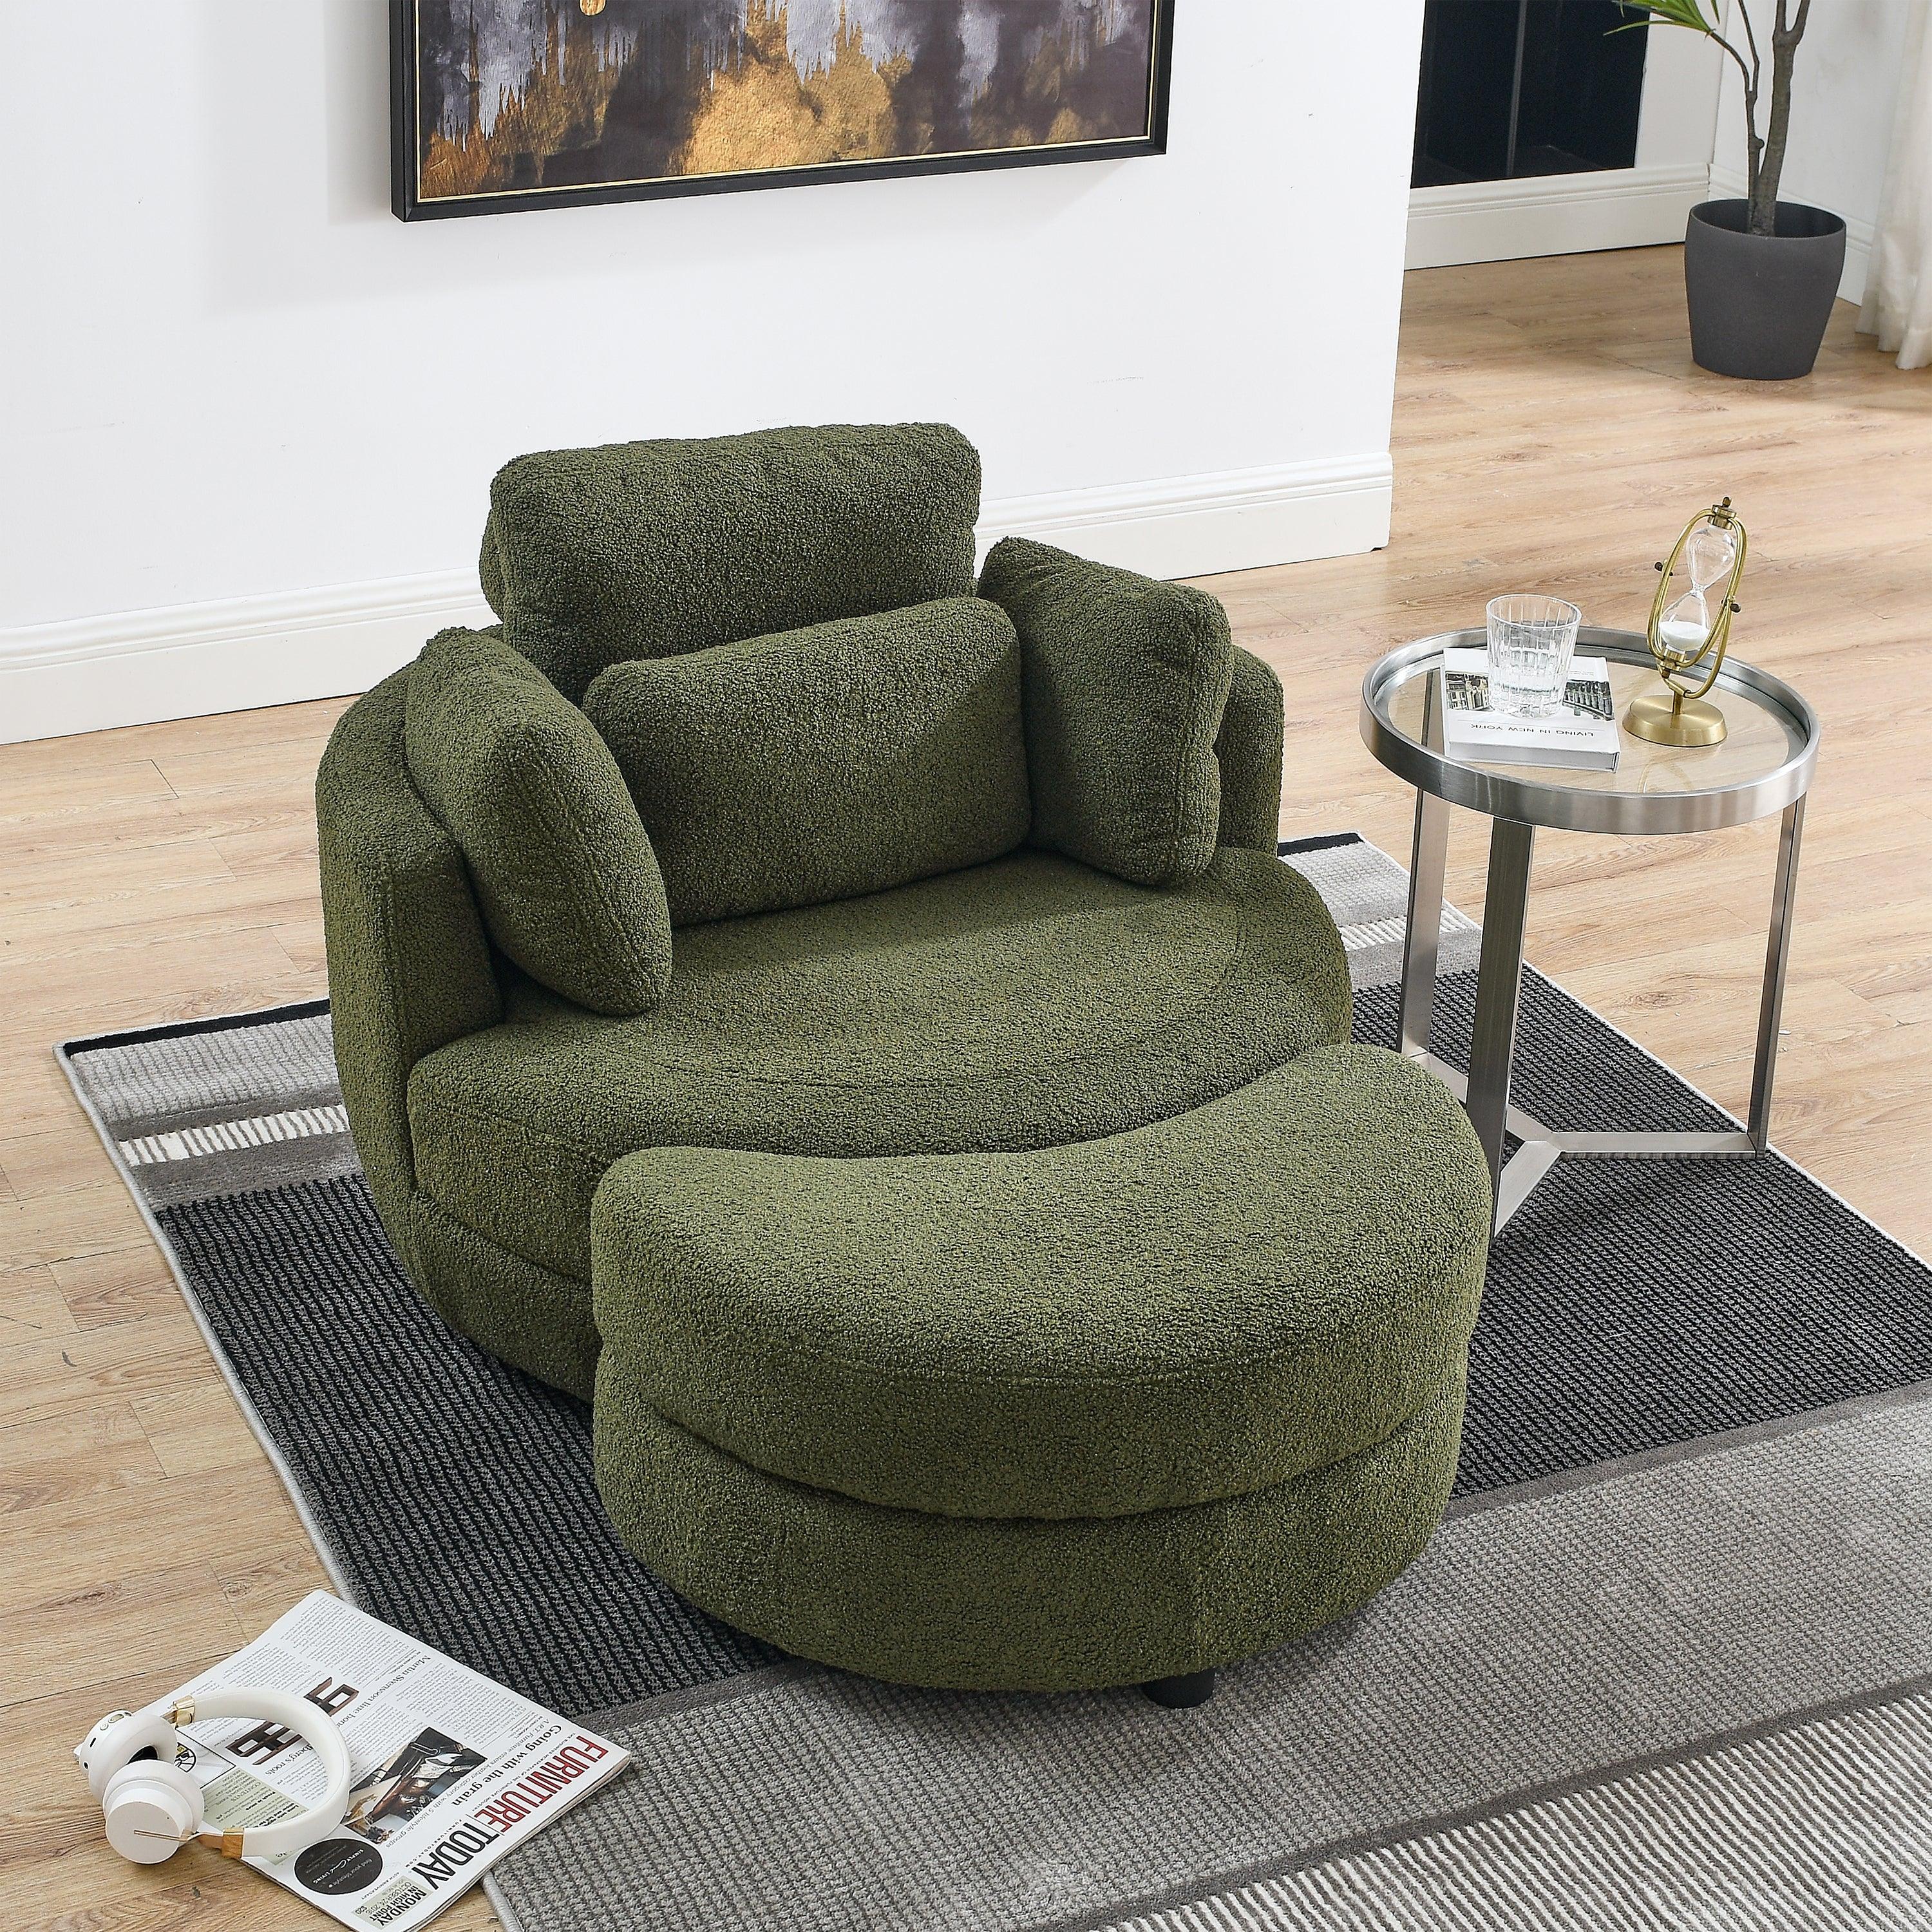 🆓🚛 39"W Oversized Teddy Fabric Swivel Chair With Moon Storage Ottoman for Living Room, 4 Pillows, Olive Green